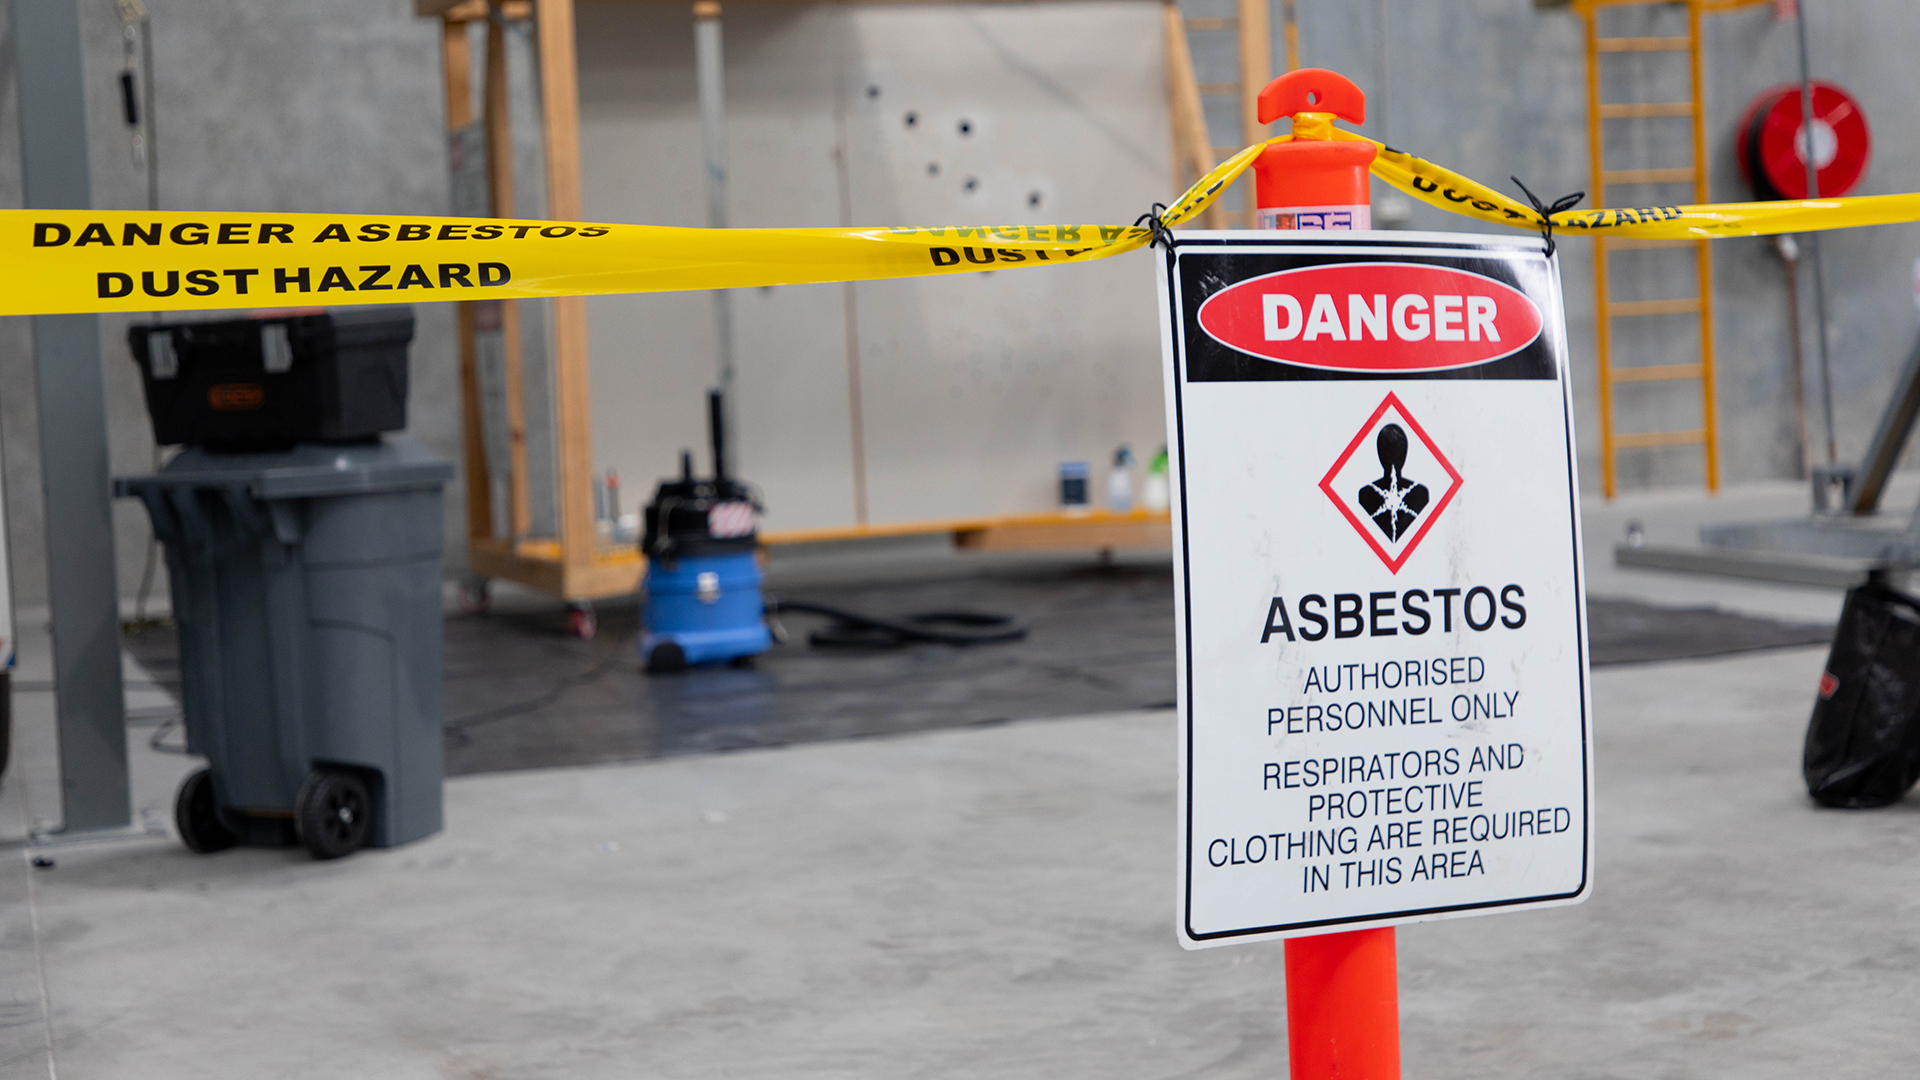 Asbestos danger sign in the HSE Sydney training area.